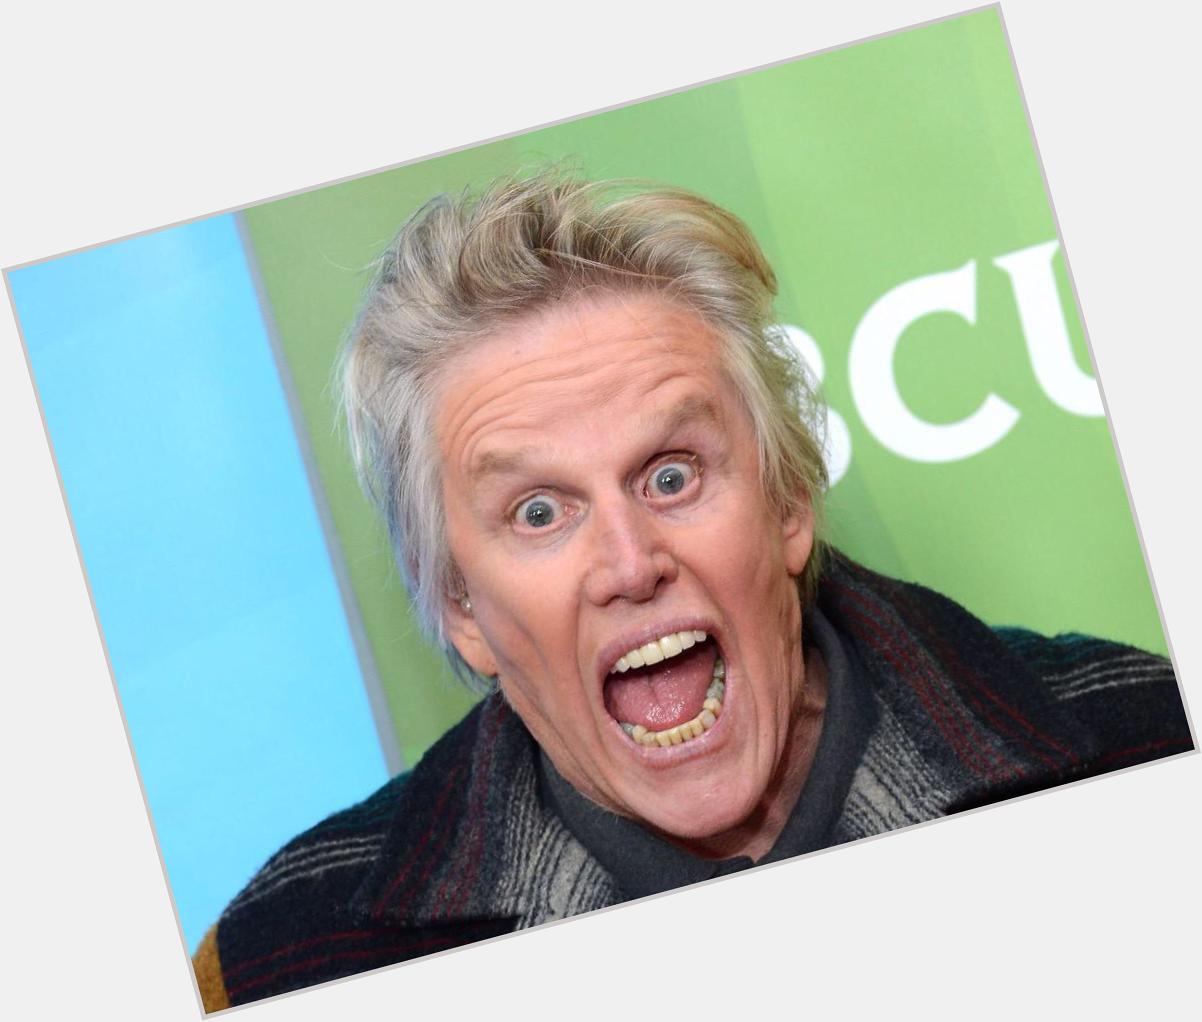 Happy Bday Gary Busey somehow u made it to 71 